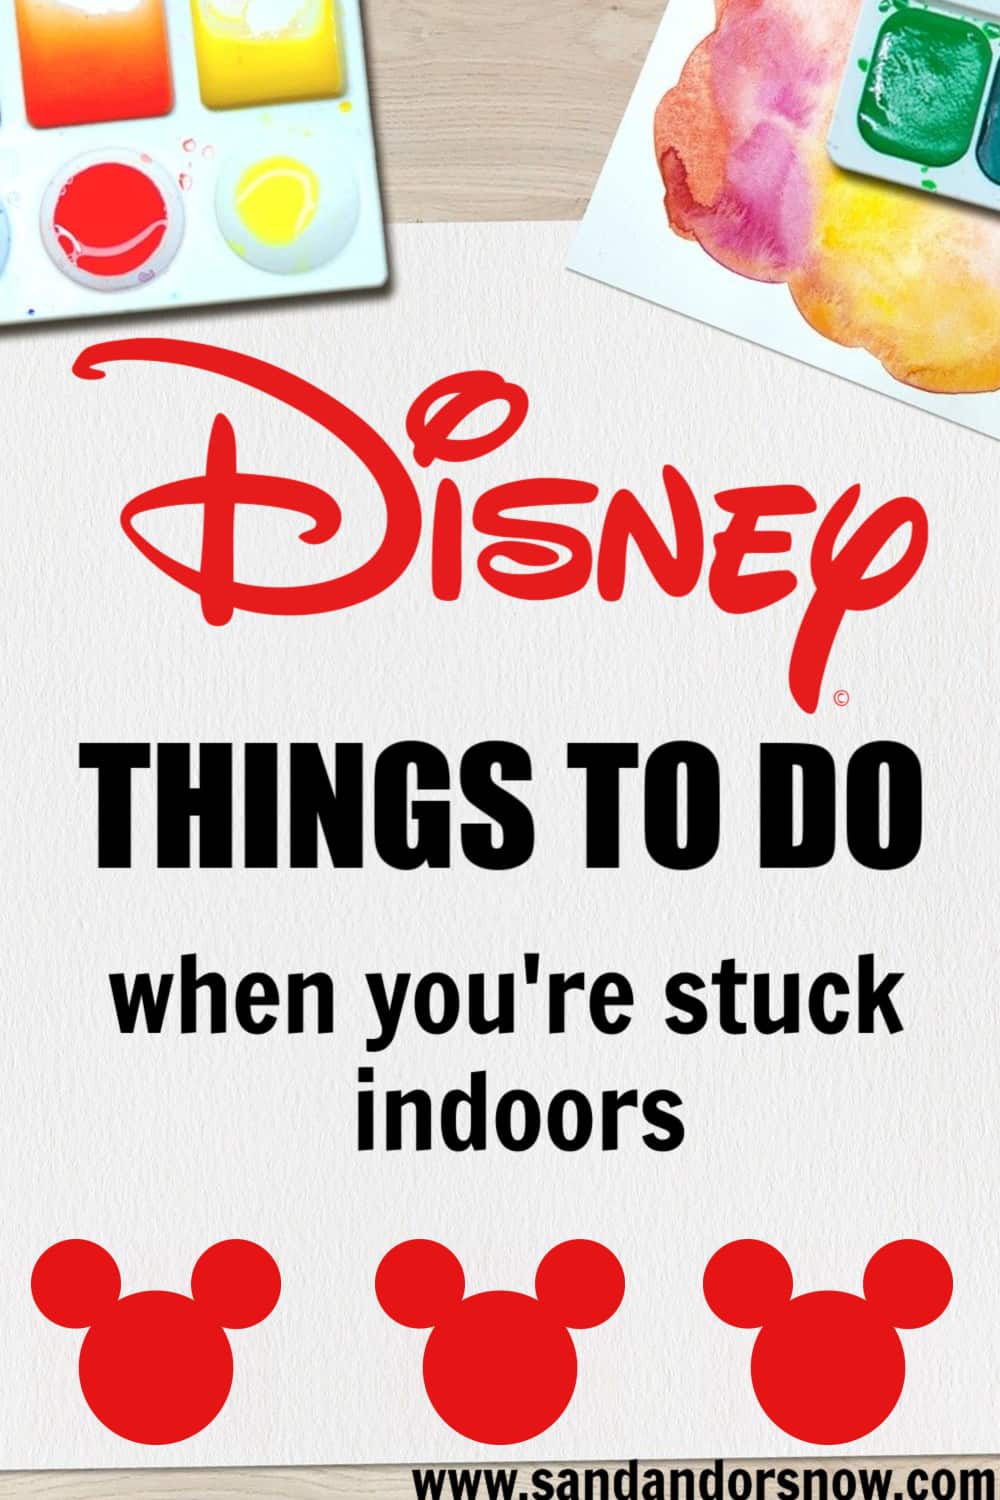 Stuck in the house and looking for fun Disney things to do? From crafts to recipes to games and coloring pages, here are fun Disney things to do when you're stuck inside! #Disney #DisneyCrafts #DisneyDIY #DisneyMovies #DisneyRecipes #DisneyThingstodo